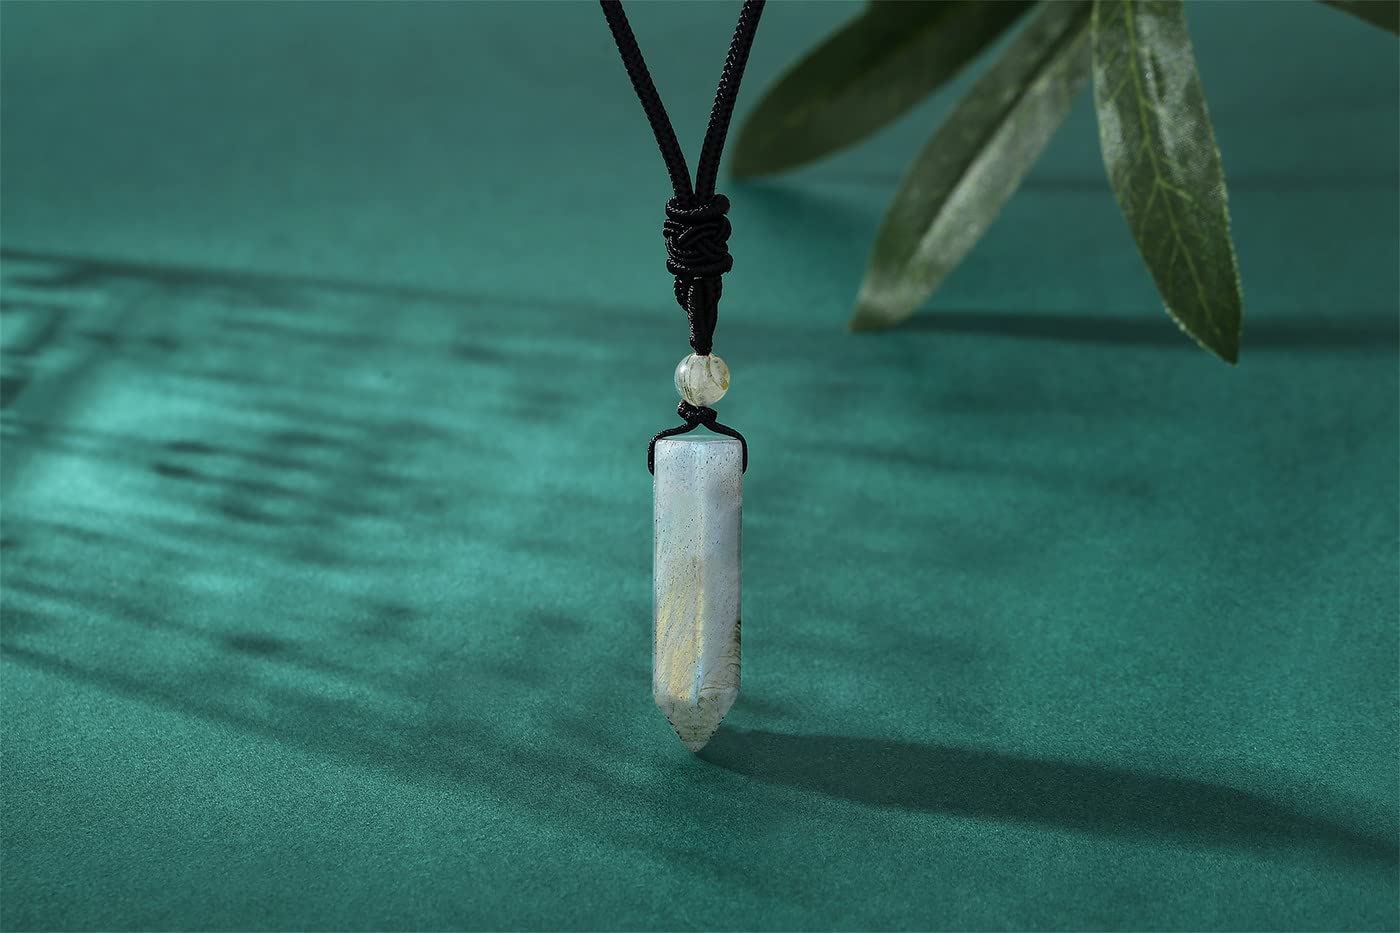 XIANNVXI Crystal Necklace for Men Women Adjustable Rope Hexagonal Point Healing Crystal Natural Stone Pendant Necklaces Gemstone Jewelry